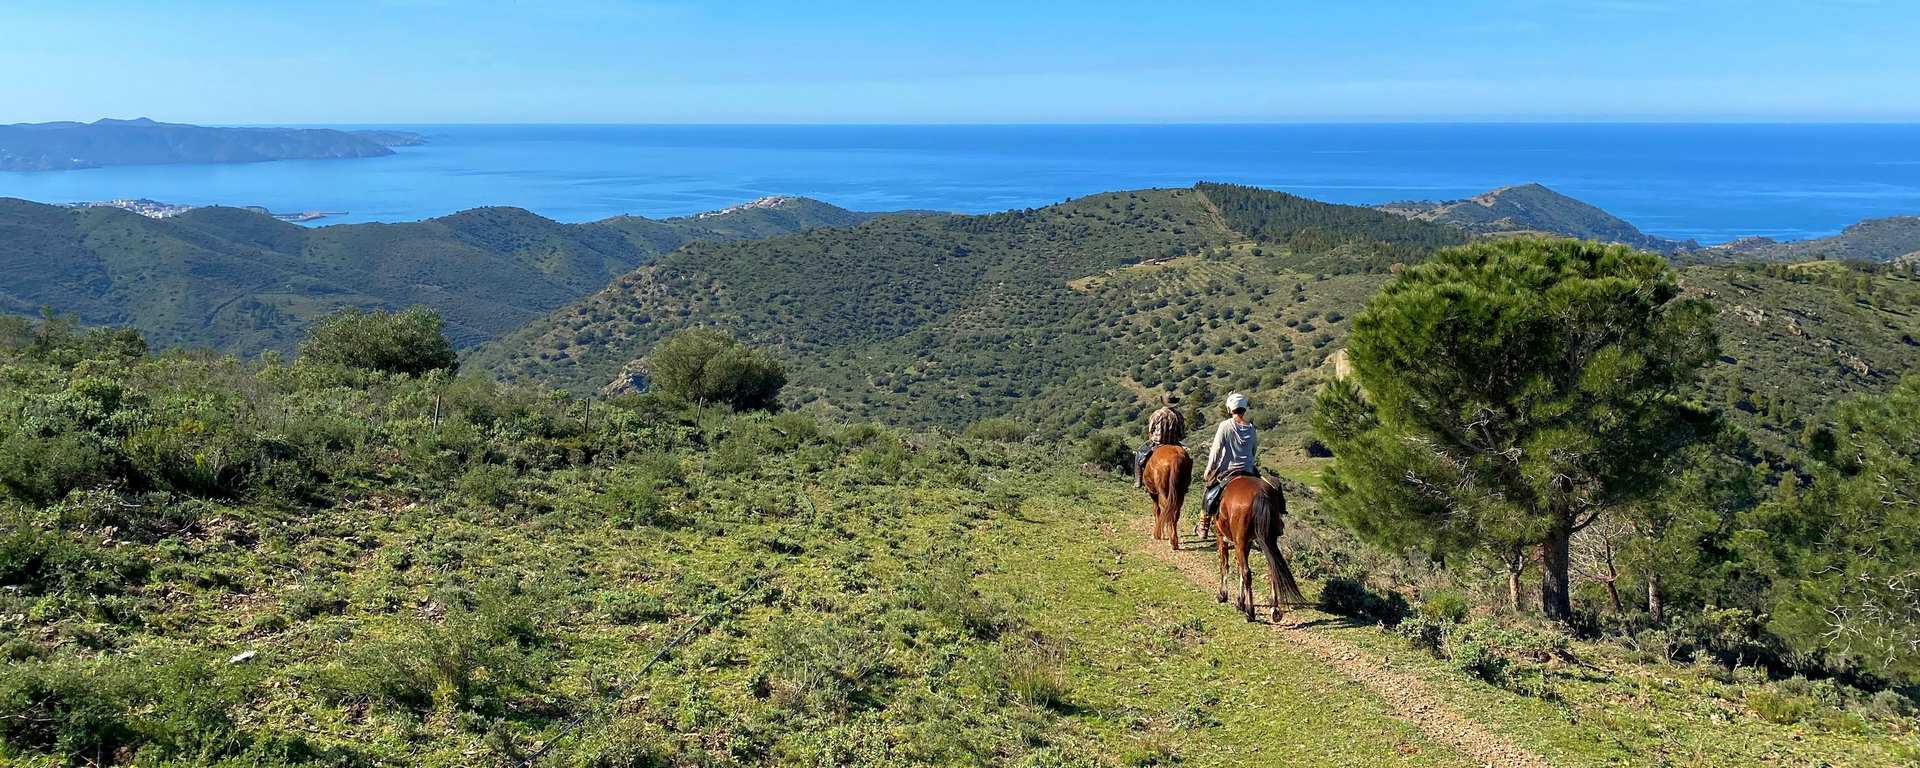  Trail riding by the sea – enjoy the freedom of independent riding!